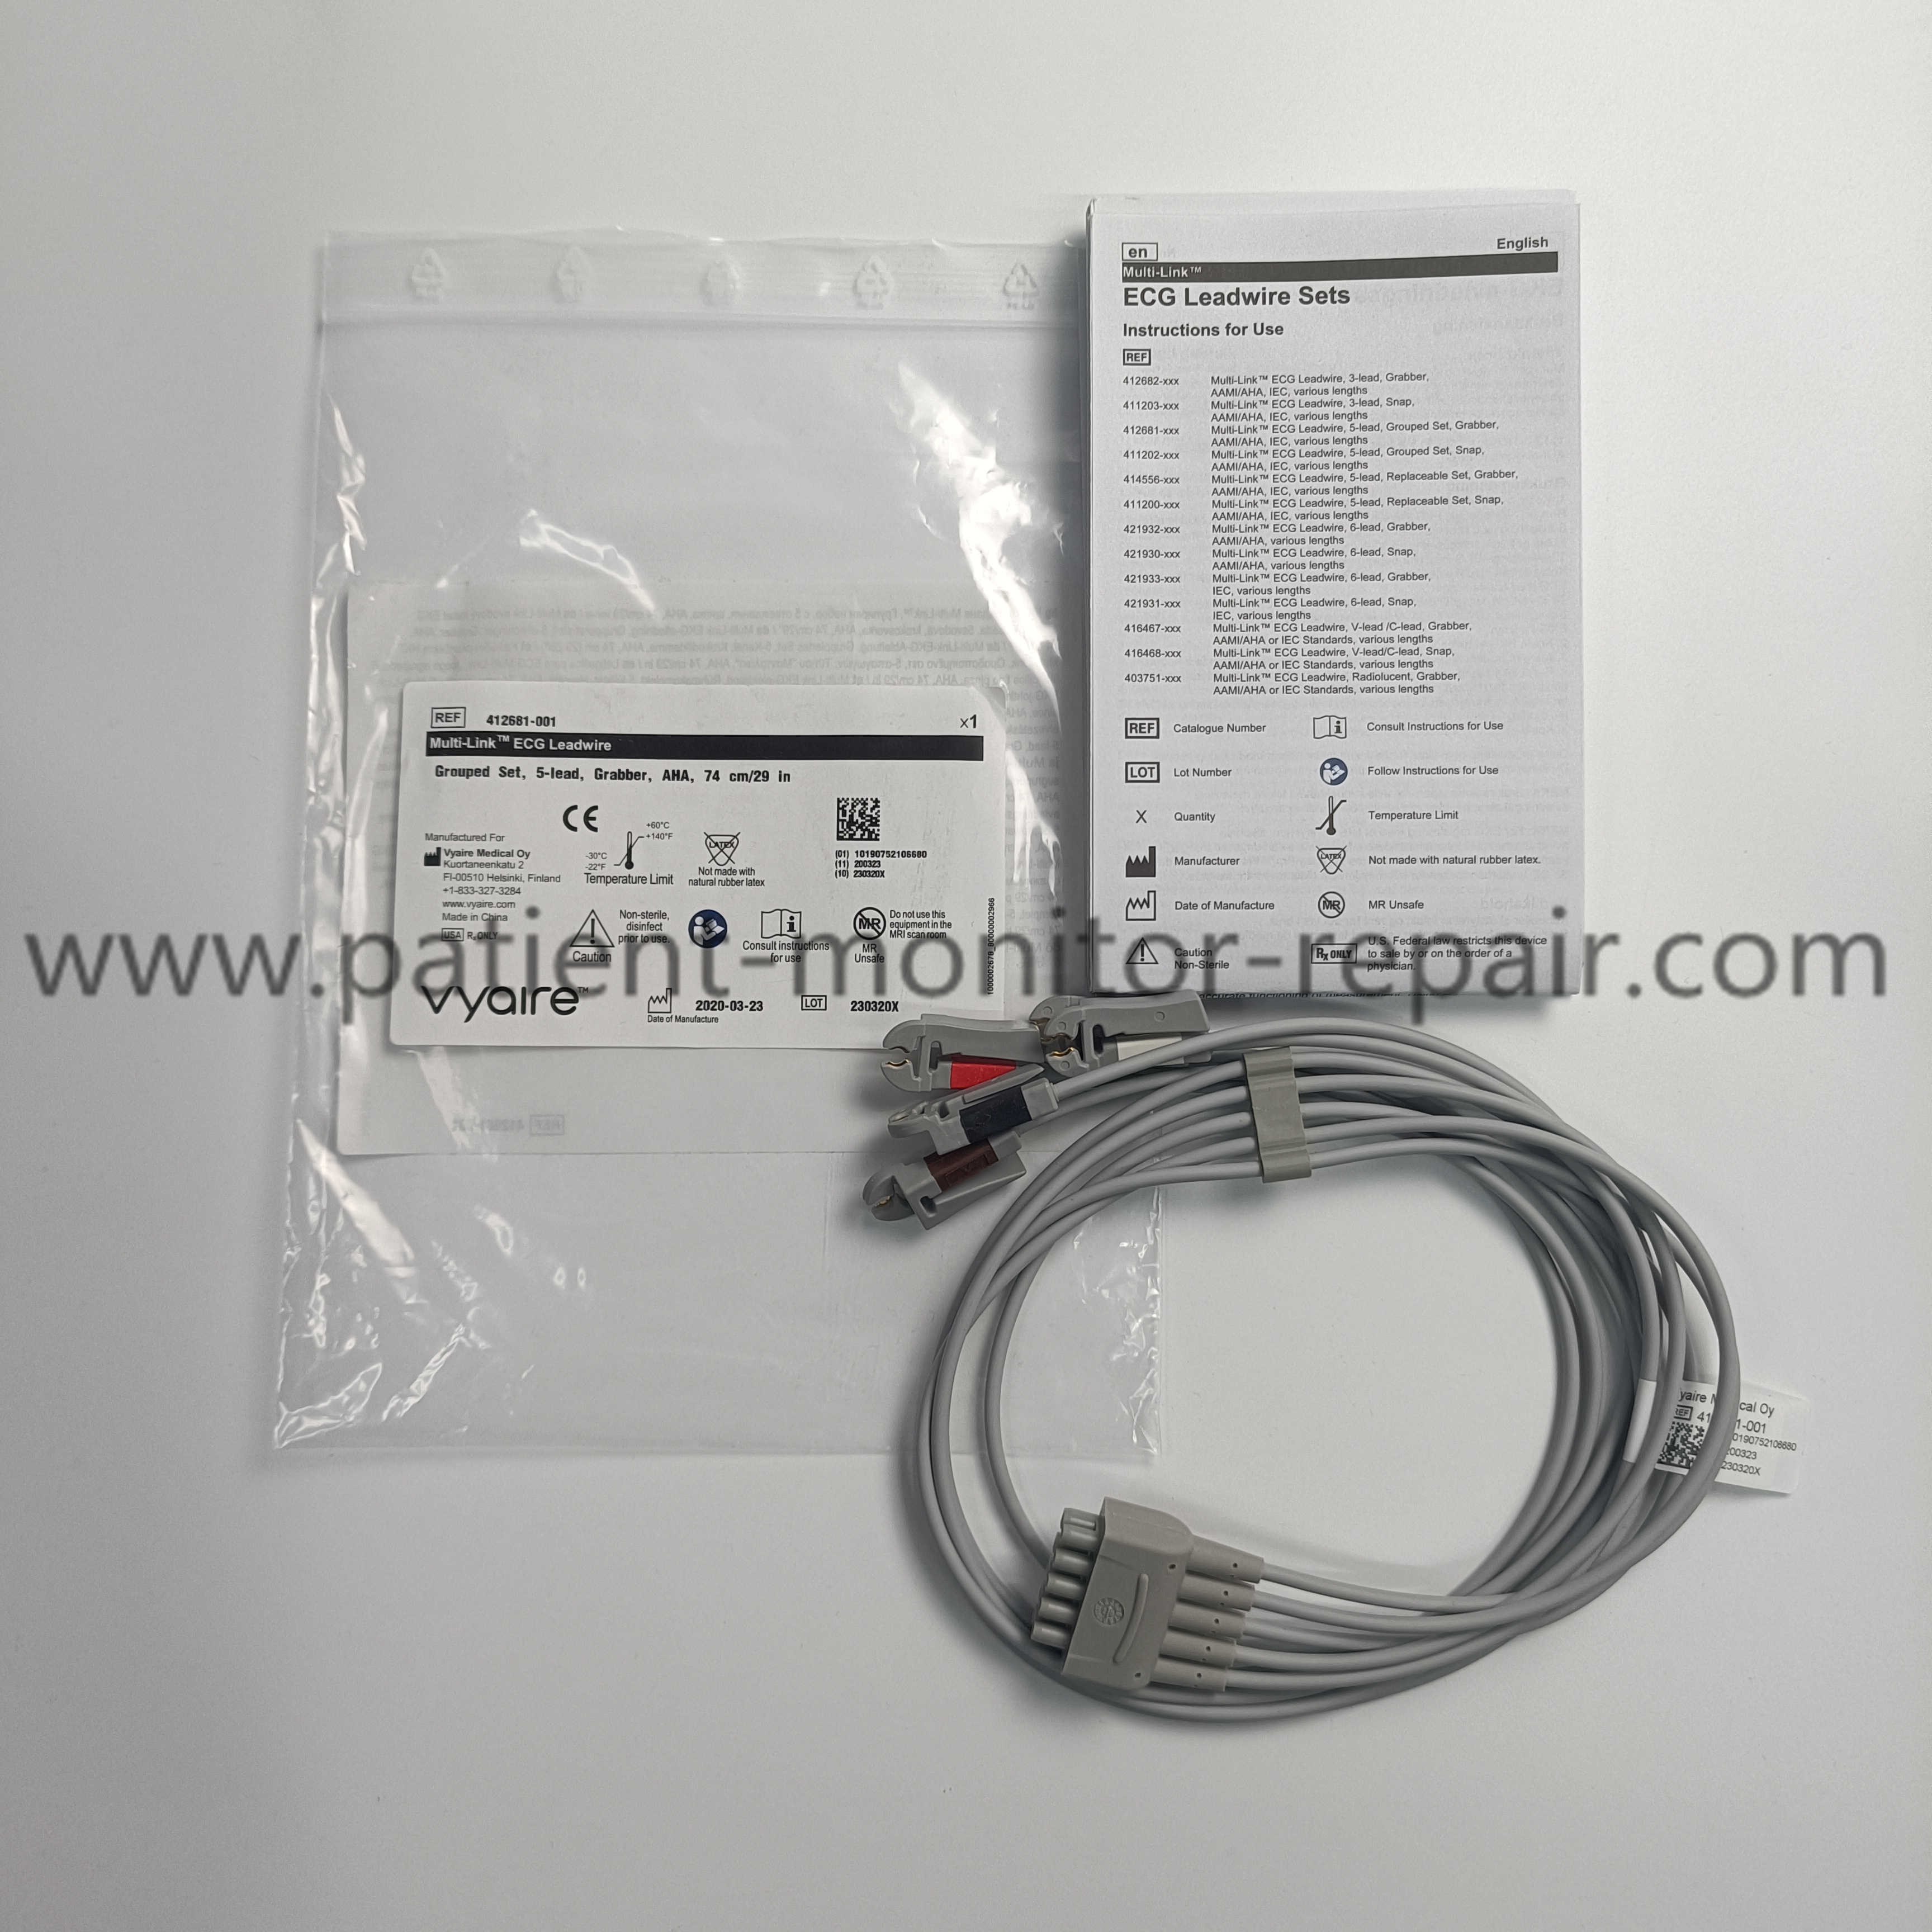 GE Multi-Link ECG Leadwire Cable Set, 5-Lead, Grouped Grabber, AHA 412681-001 414556-001 2106391-001